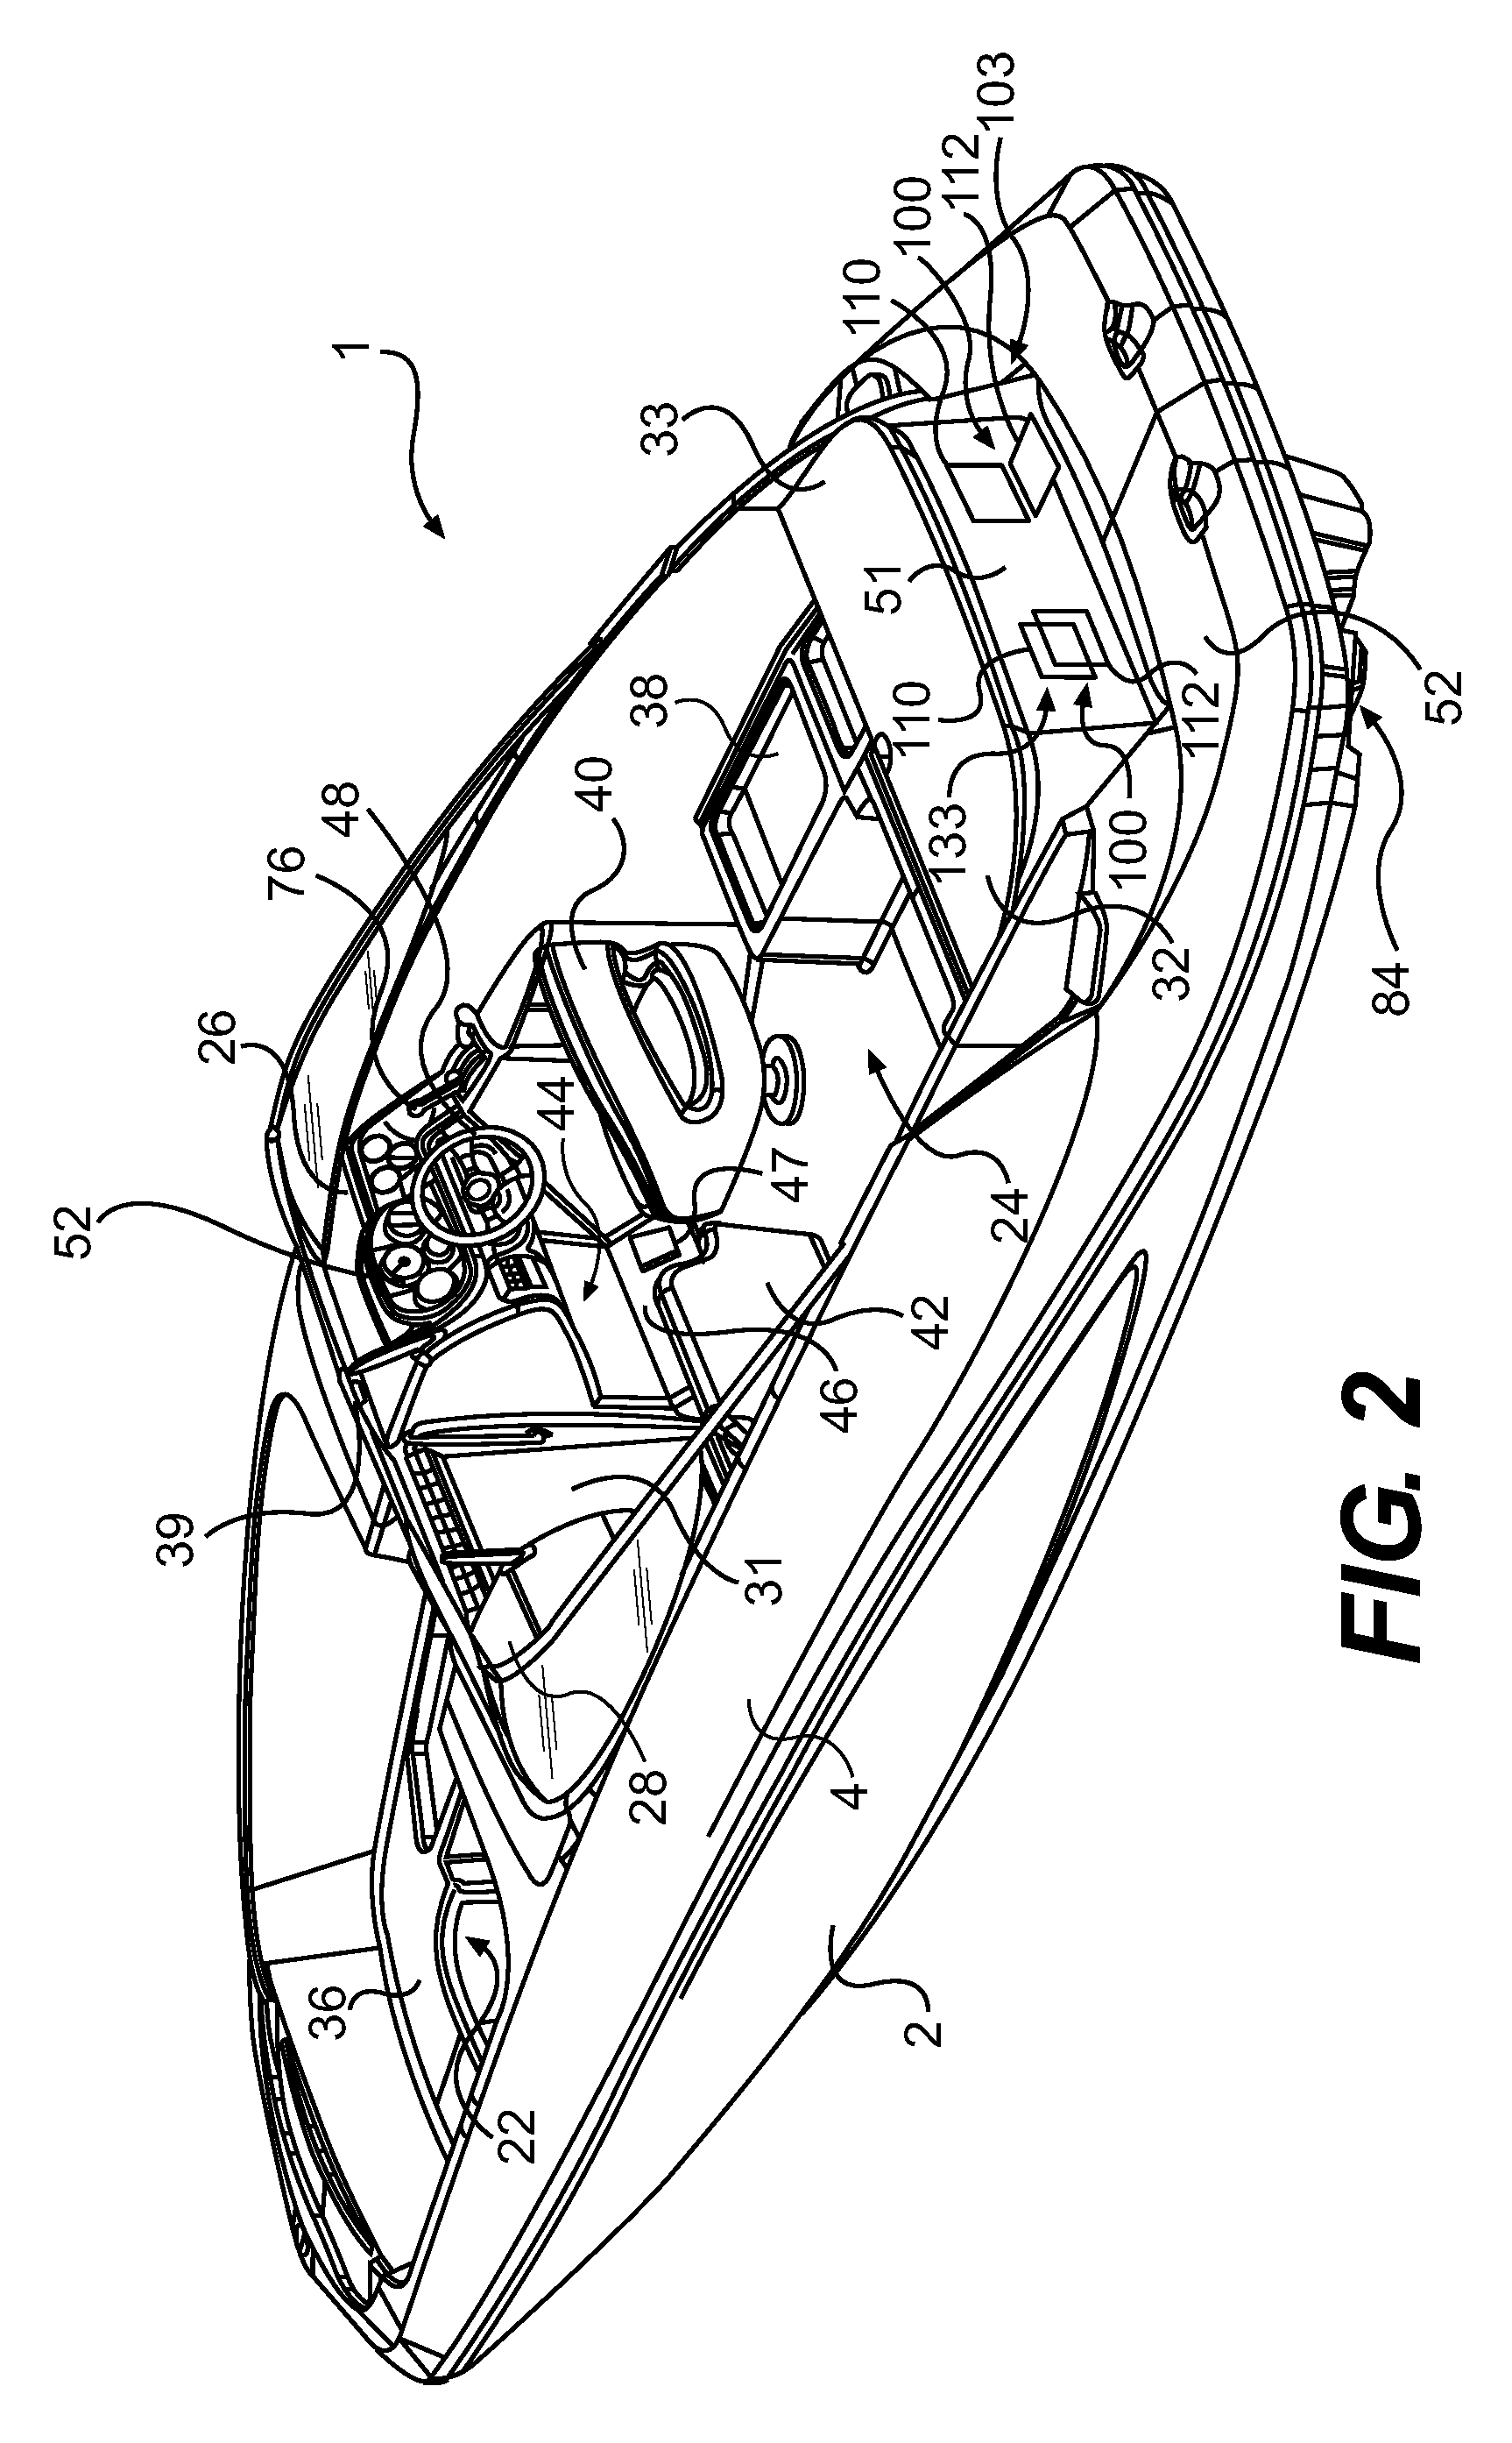 Convertible seat assembly for a watercraft